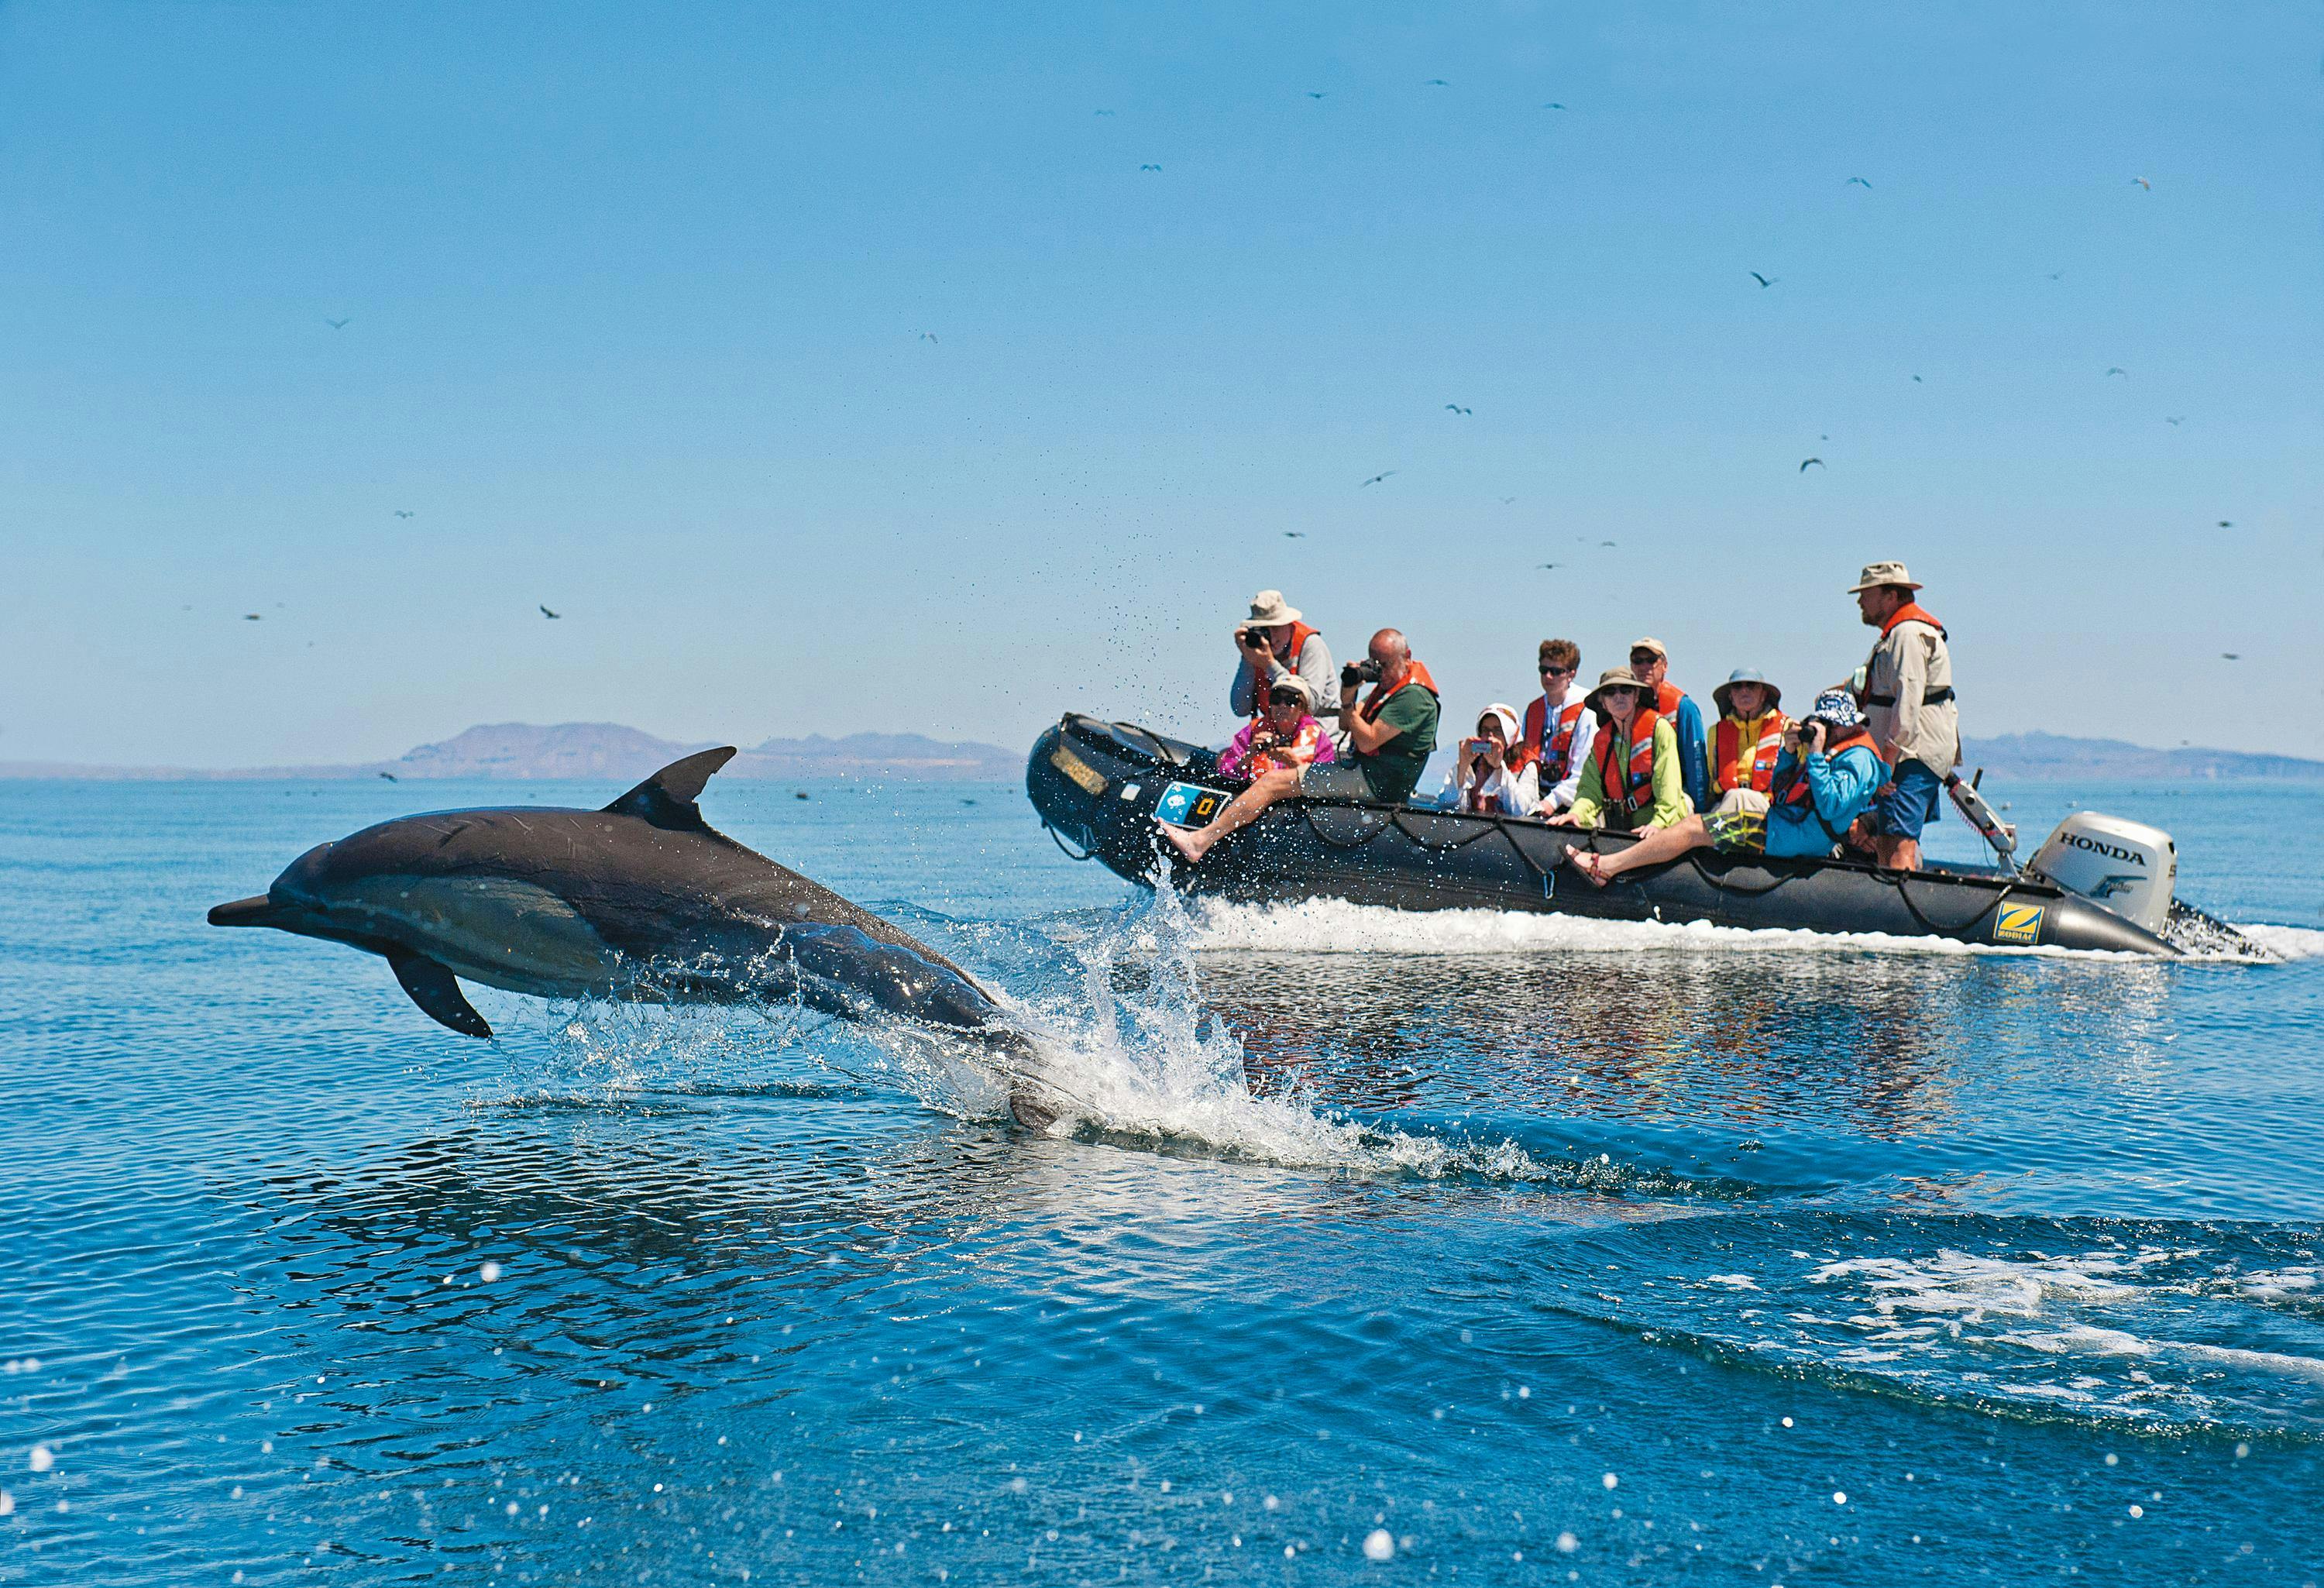 Guests get a upclose encounted with a dolphin bow-riding next to their zodiac in Baja California, Mexico